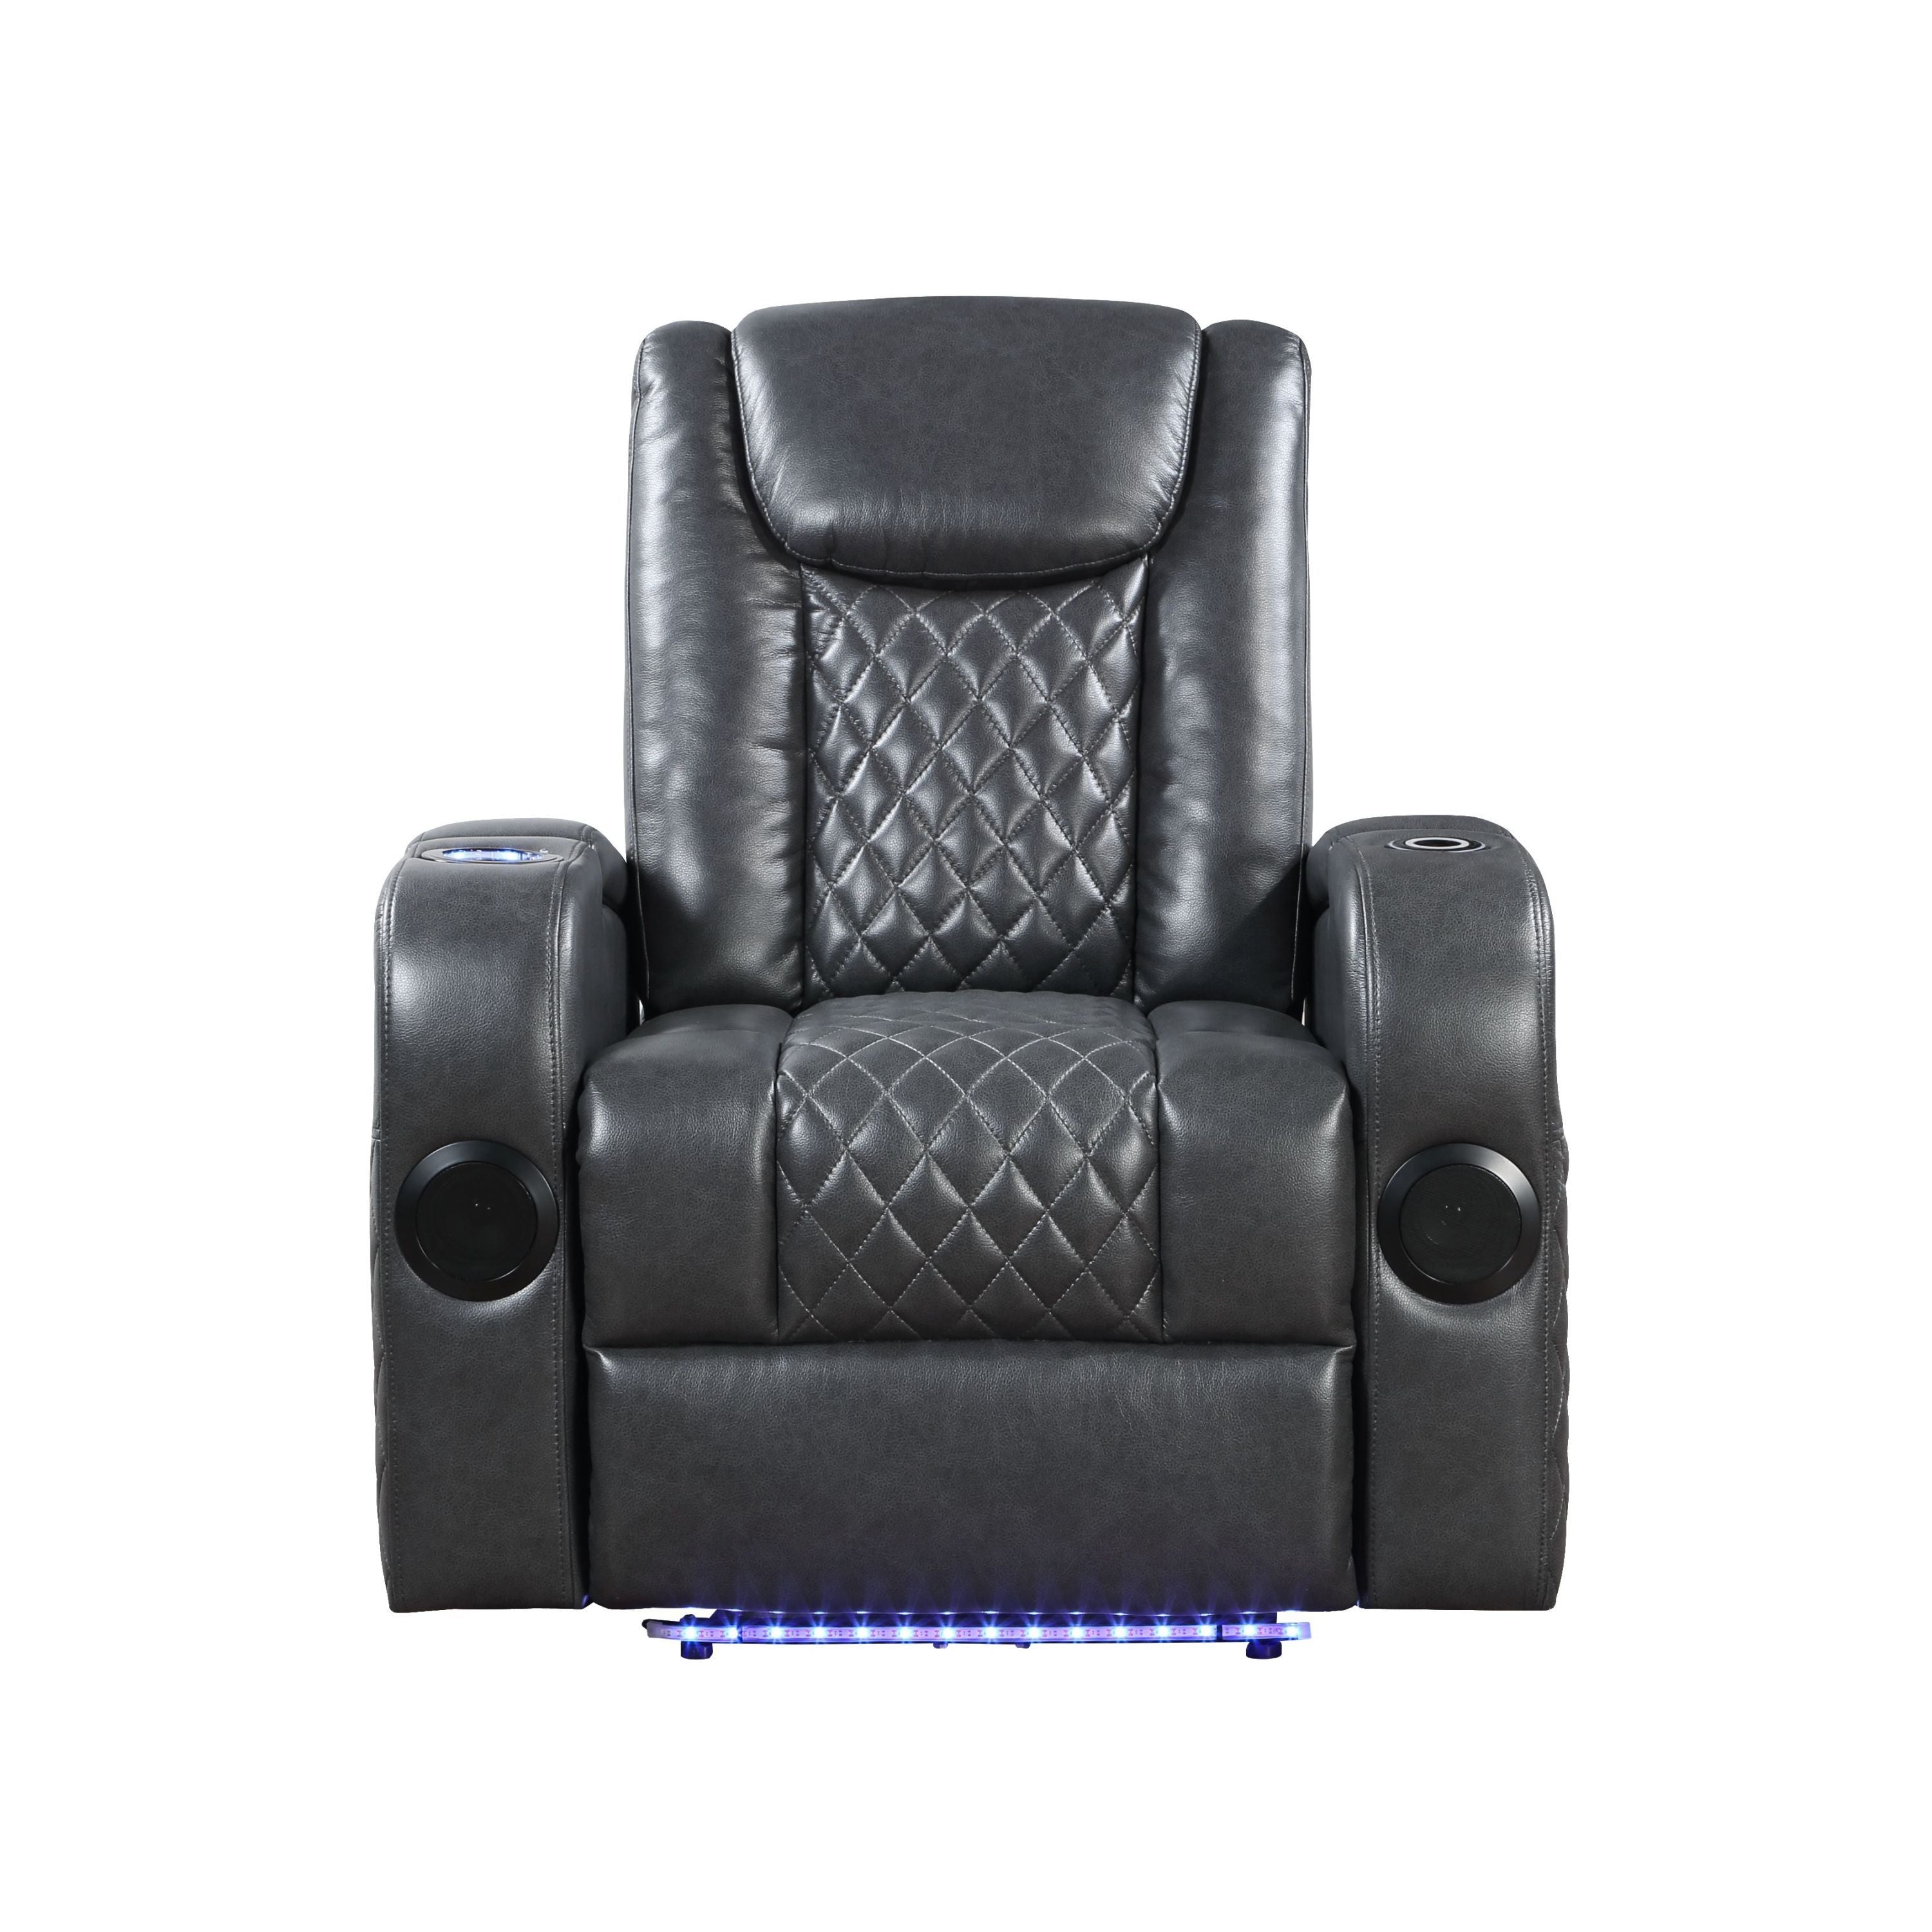 Power Motion Recliner w/Bluetooth Speaker & Cooling Cup Holder